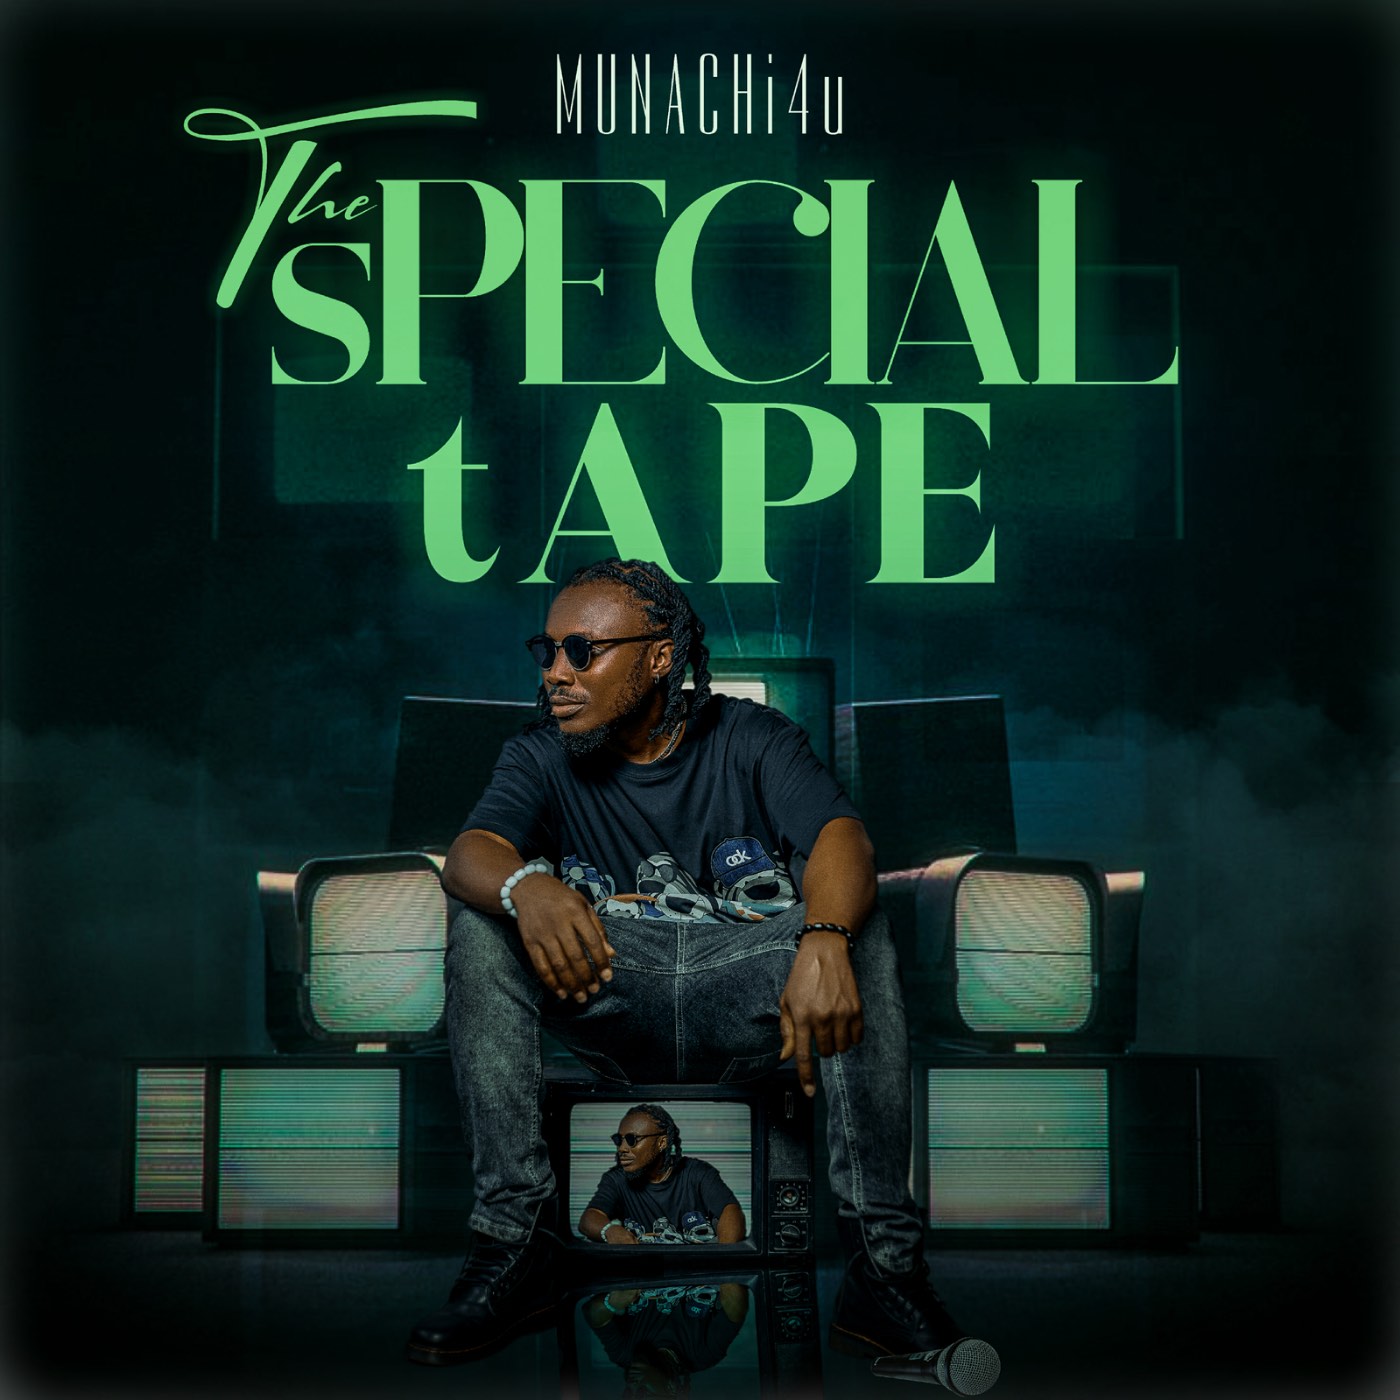 The Special Tape (TST) by Munachi